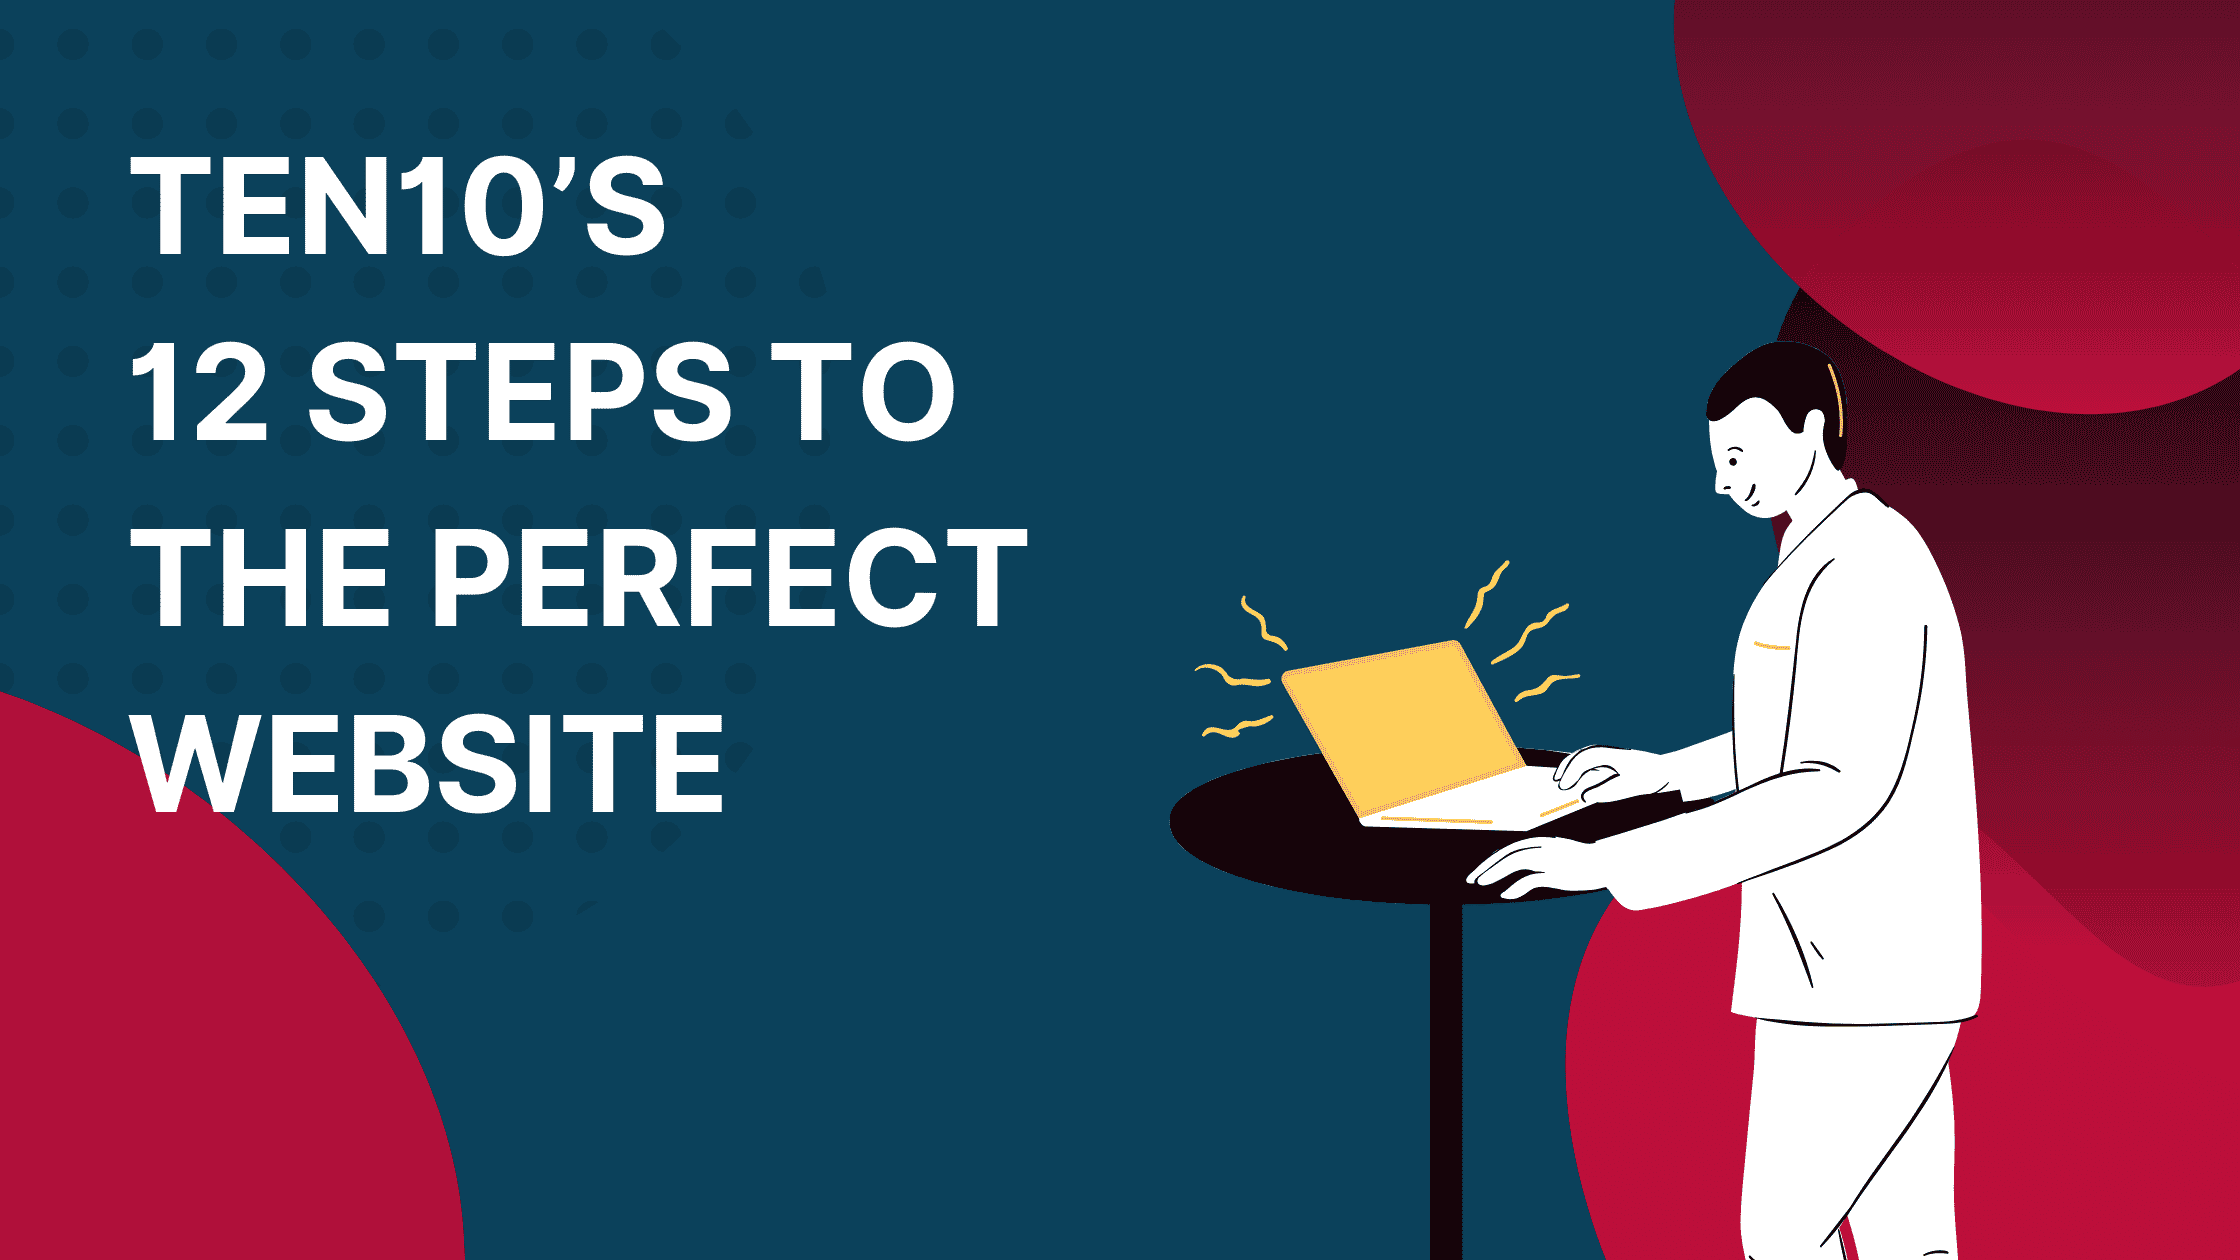 Ten10’s 12 Steps to the perfect website